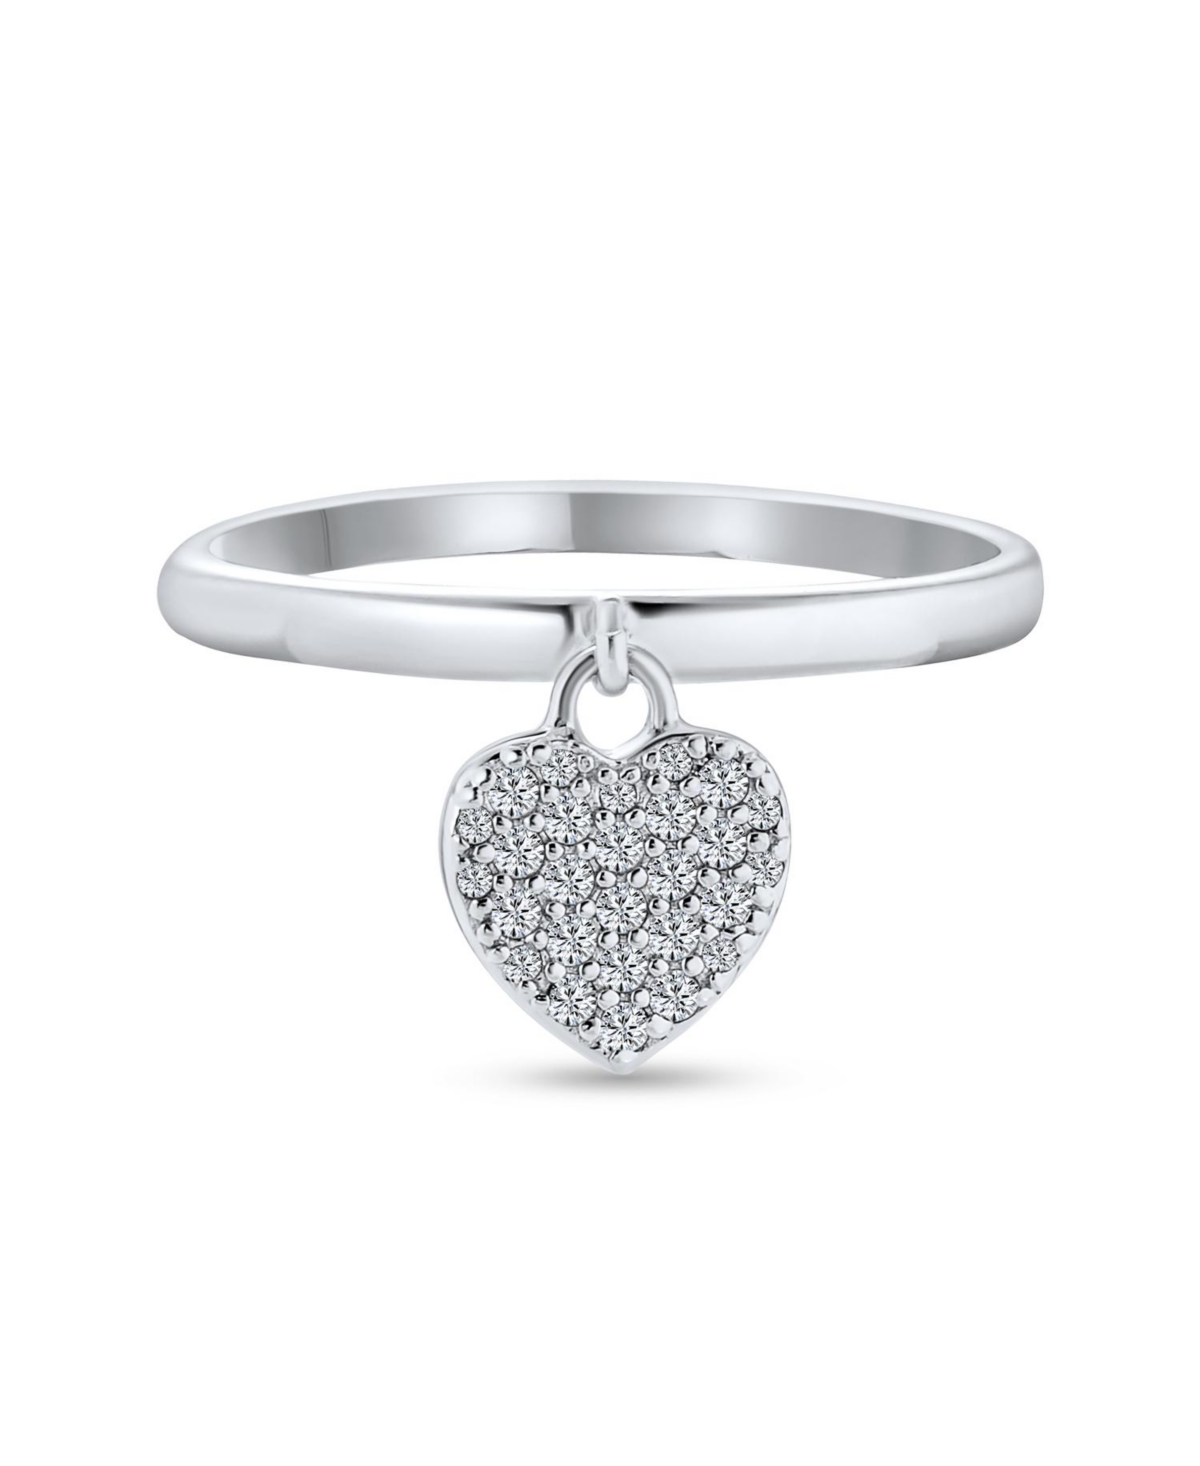 Simple Delicate .925 Sterling Silver Pave Dangle Heart Charm Ring For Teen For Girlfriend 1MM Thin Band - Clear